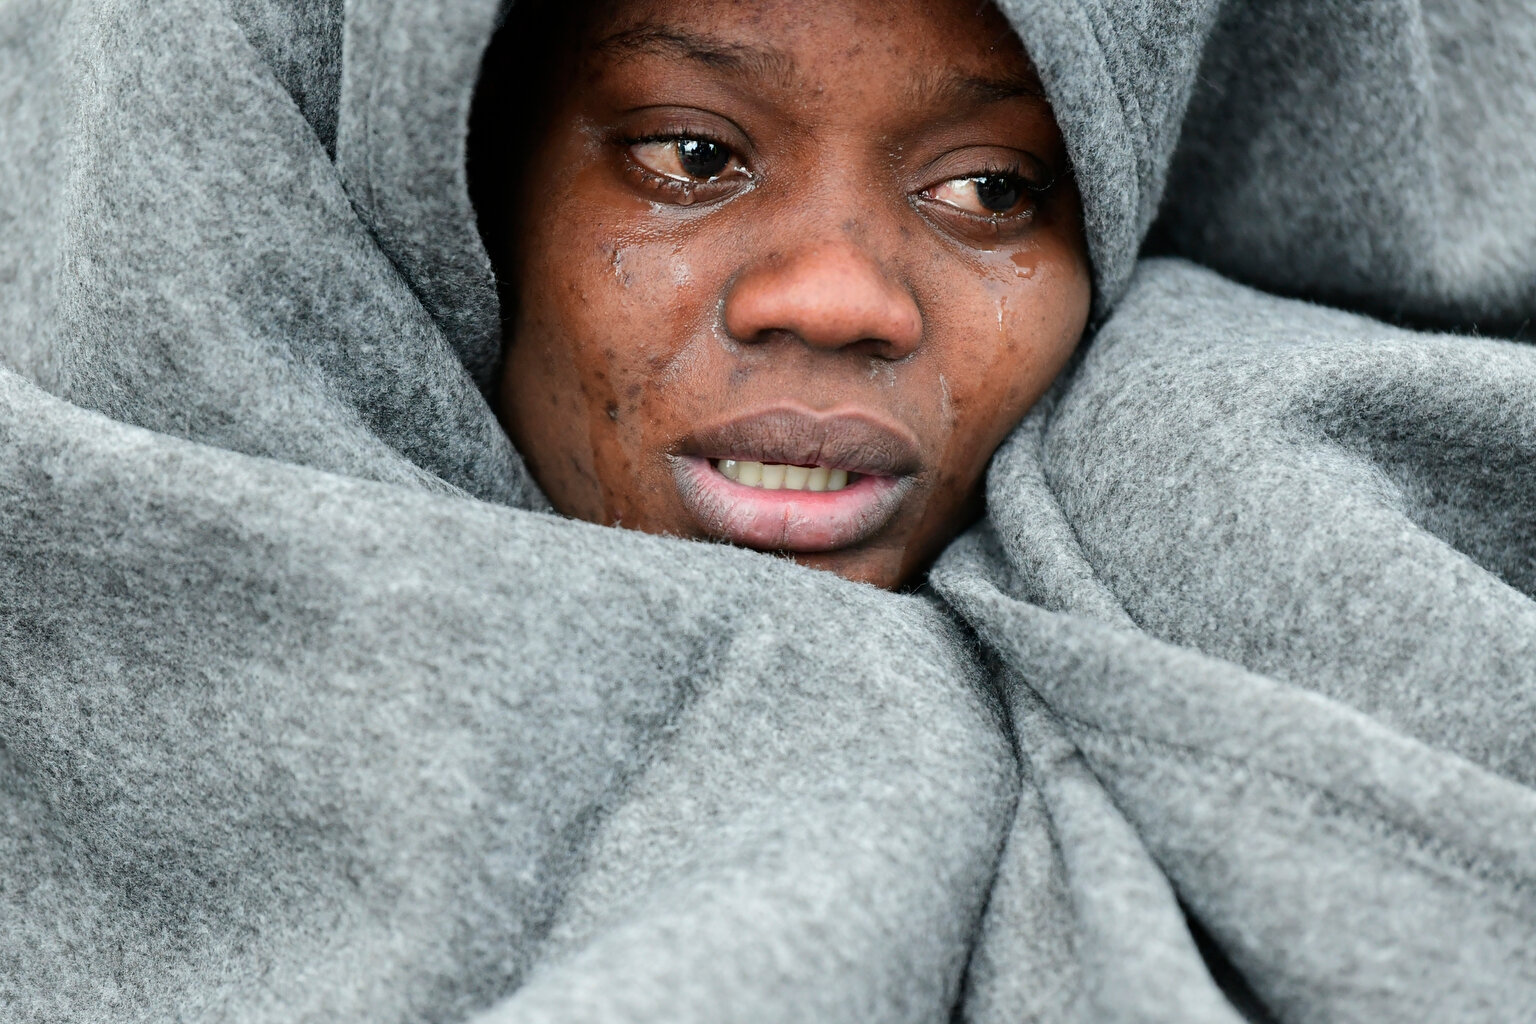  A migrant cries as she tries to warm herself as she and others arrive at the village of Skala Sikaminias, on the Greek island of Lesbos, after crossing the Aegean sea from Turkey, Saturday, Feb. 29, 2020. (AP Photo/Michael Varaklas) 